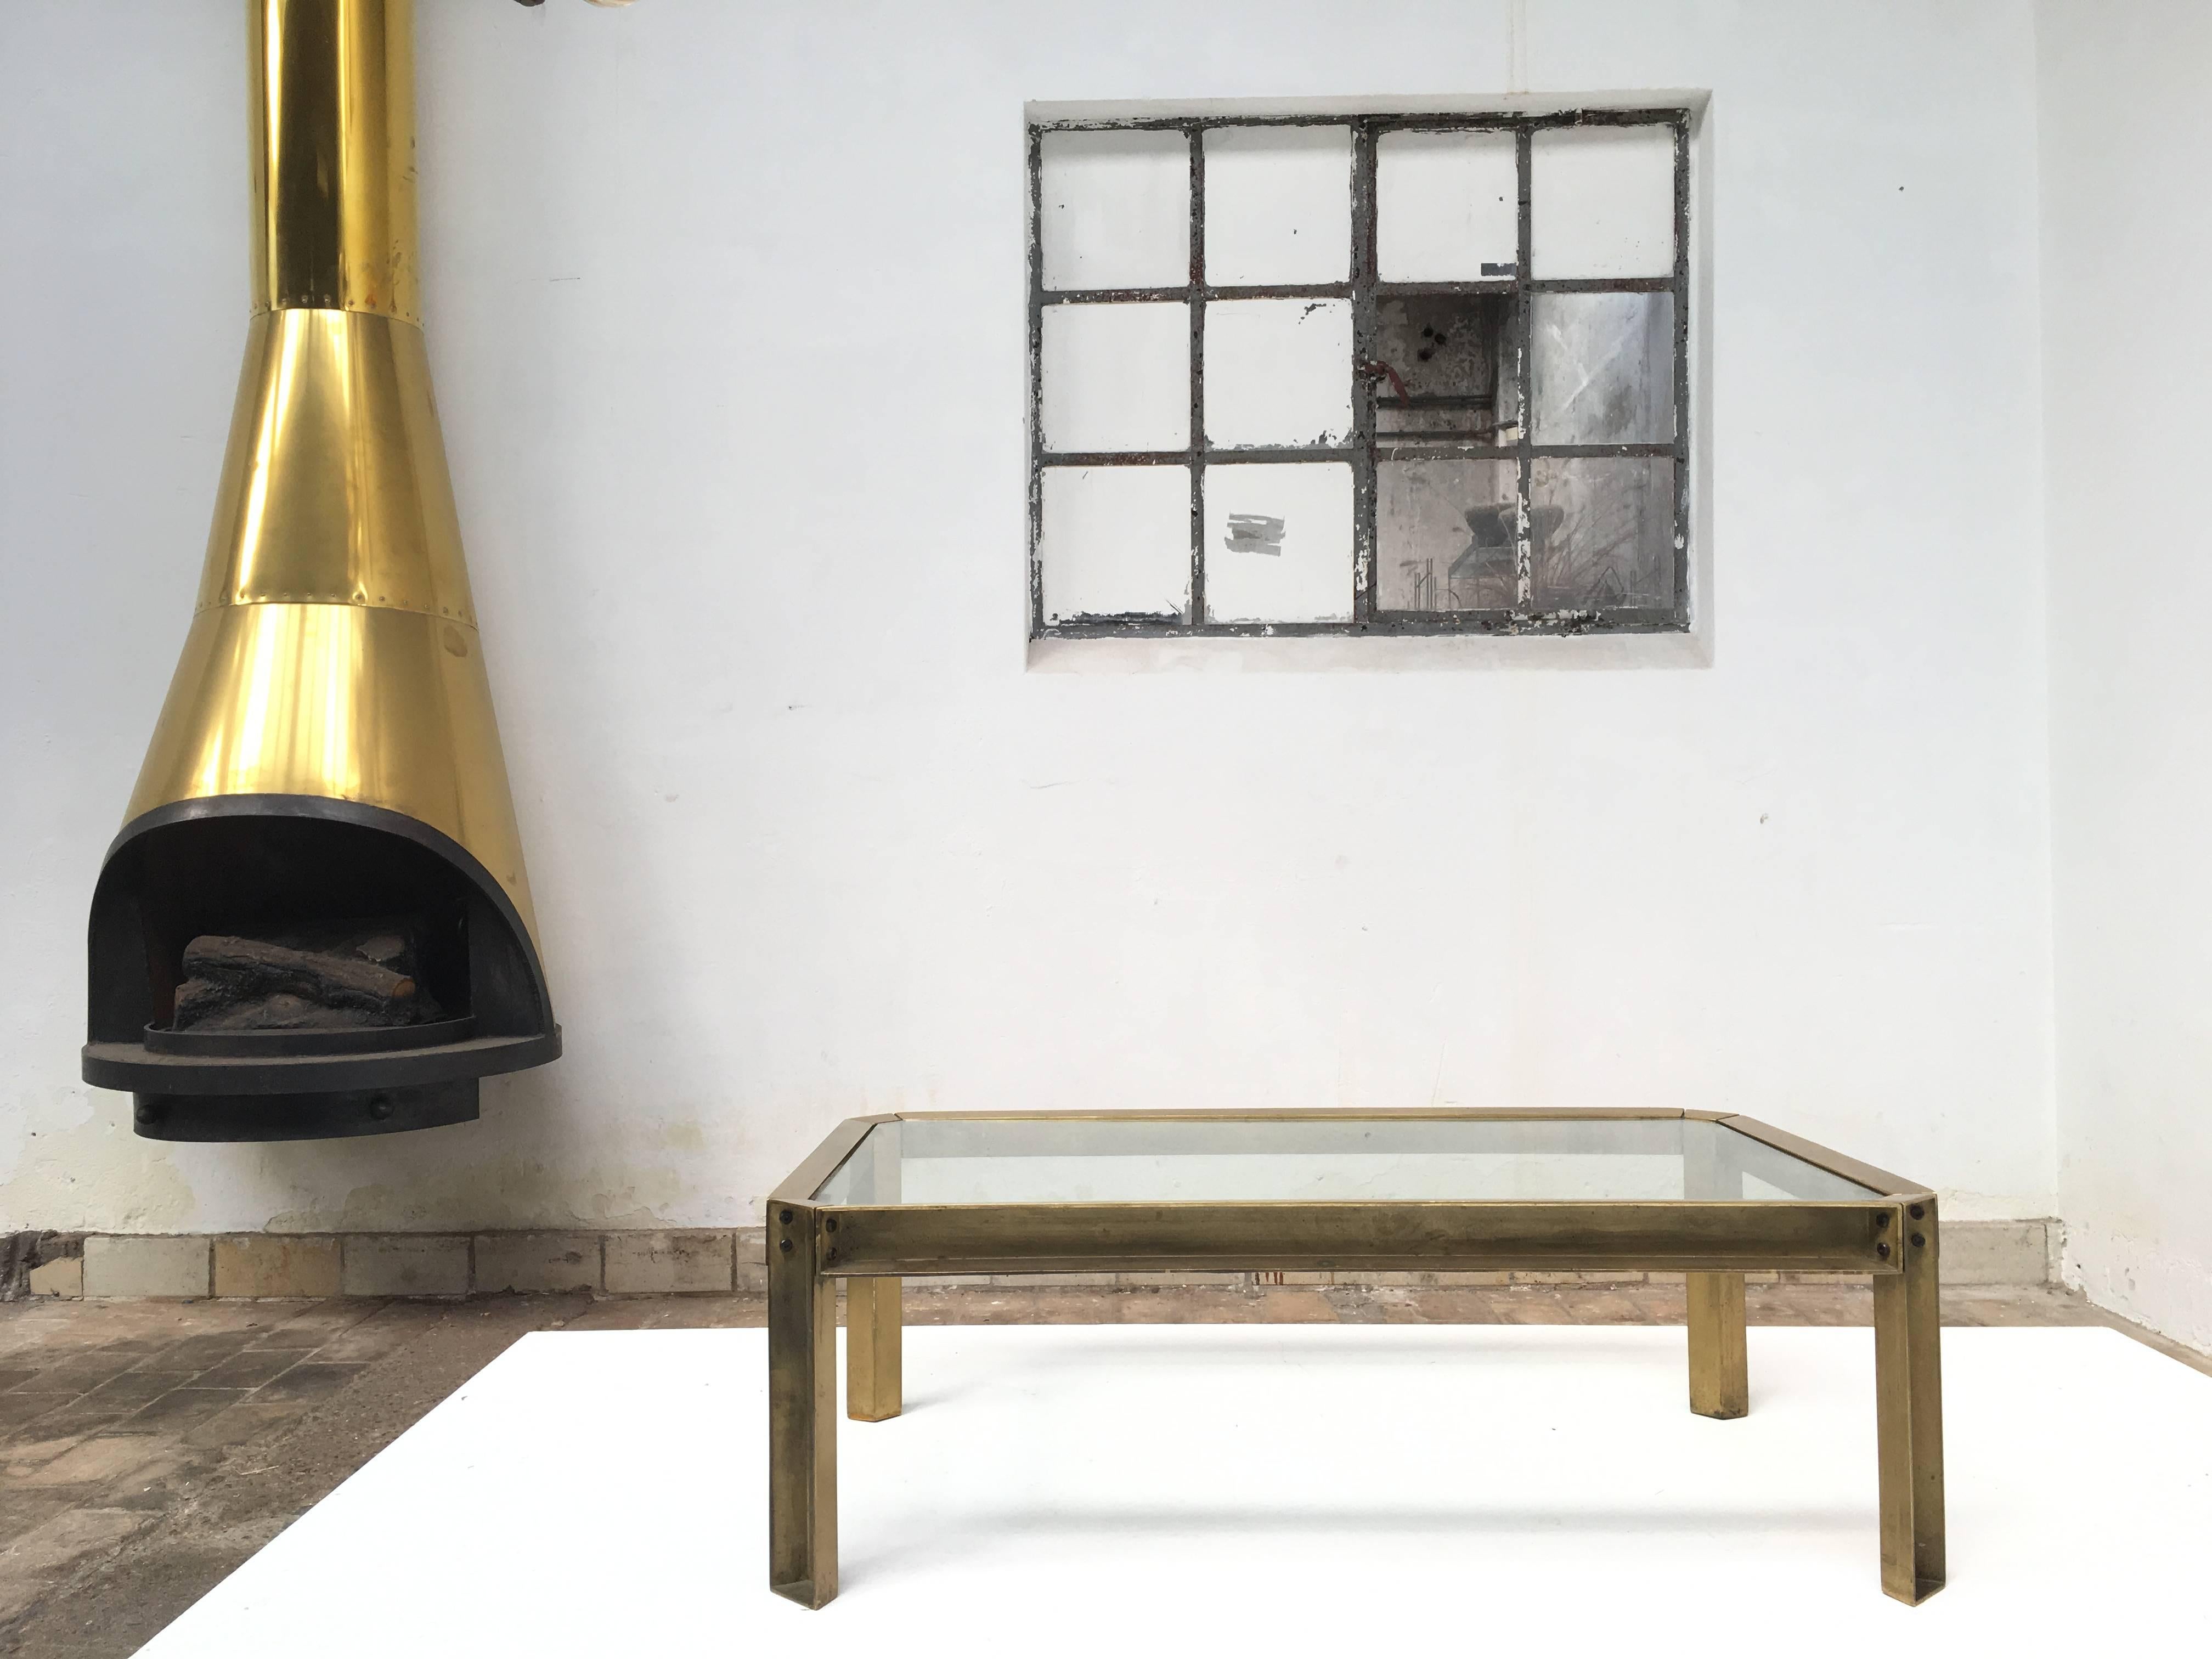 Rare coffee table by Dutch designer Peter Ghyczy.
Made from hand casted brass with a Brutalist unfinished exterior and polished sides and top.

The table frame can be totally disassembled for easy shipping.